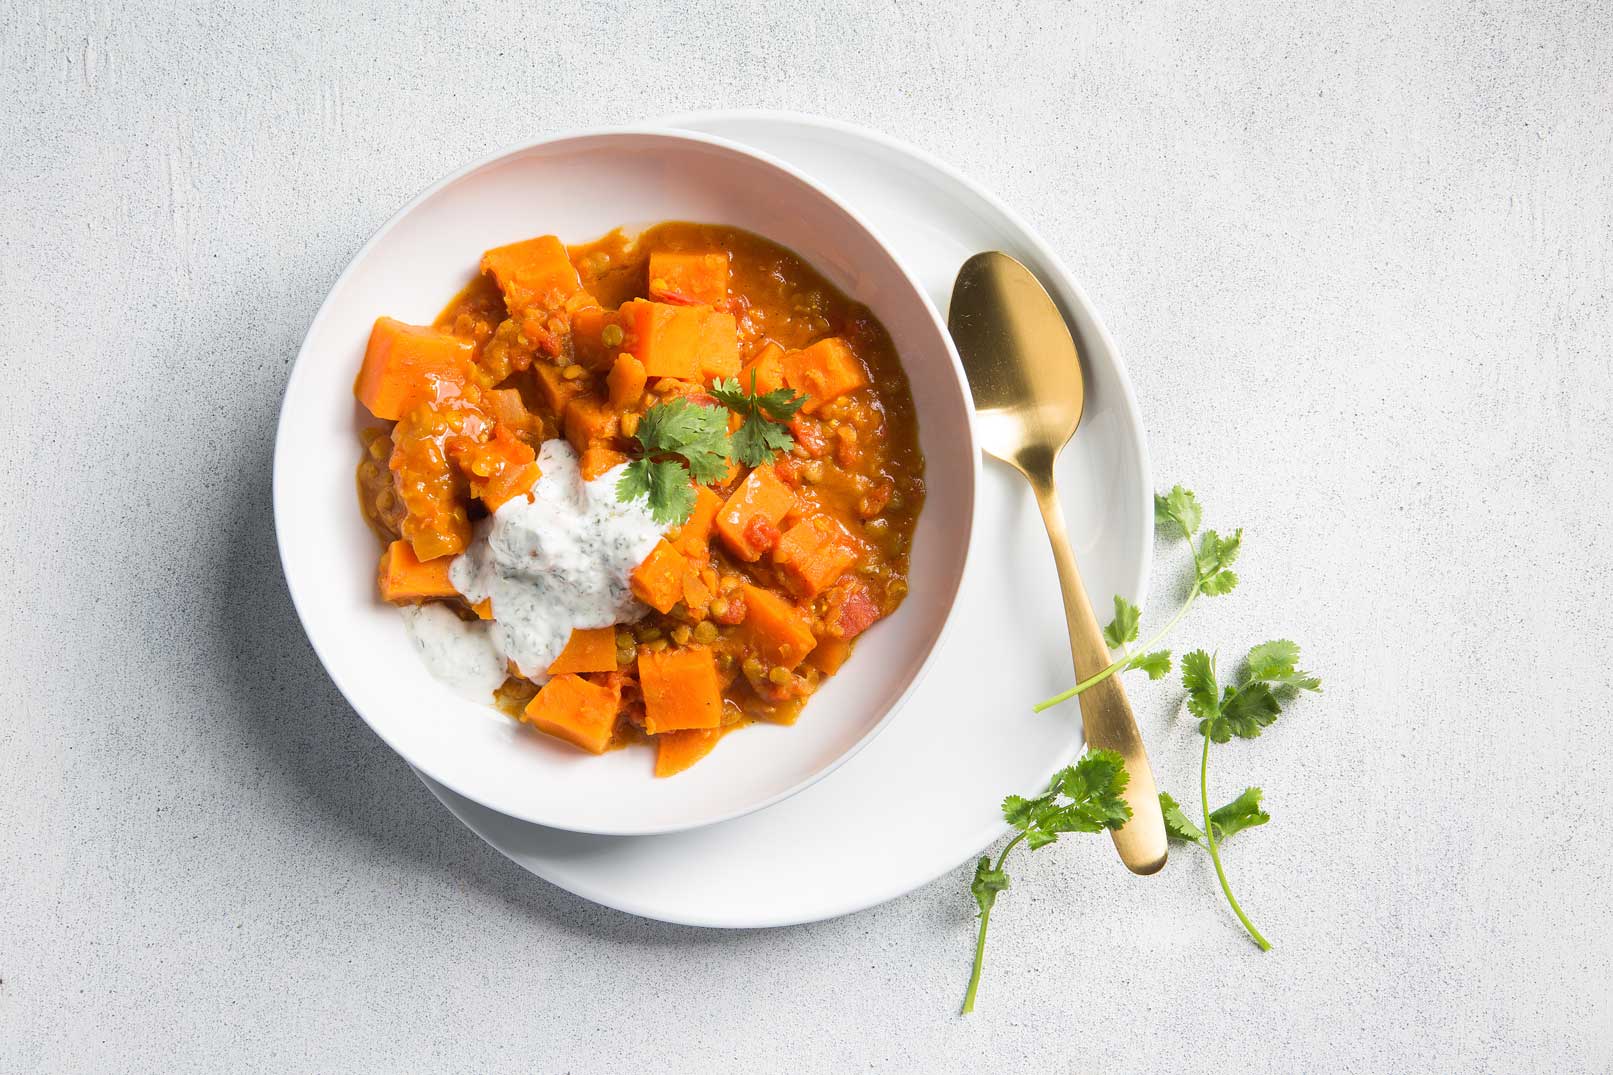 Image of Sweet potato and lentil curry in a white bowl on a white plate topped with yoghurt sauce and coriander and a gold spoon for serving